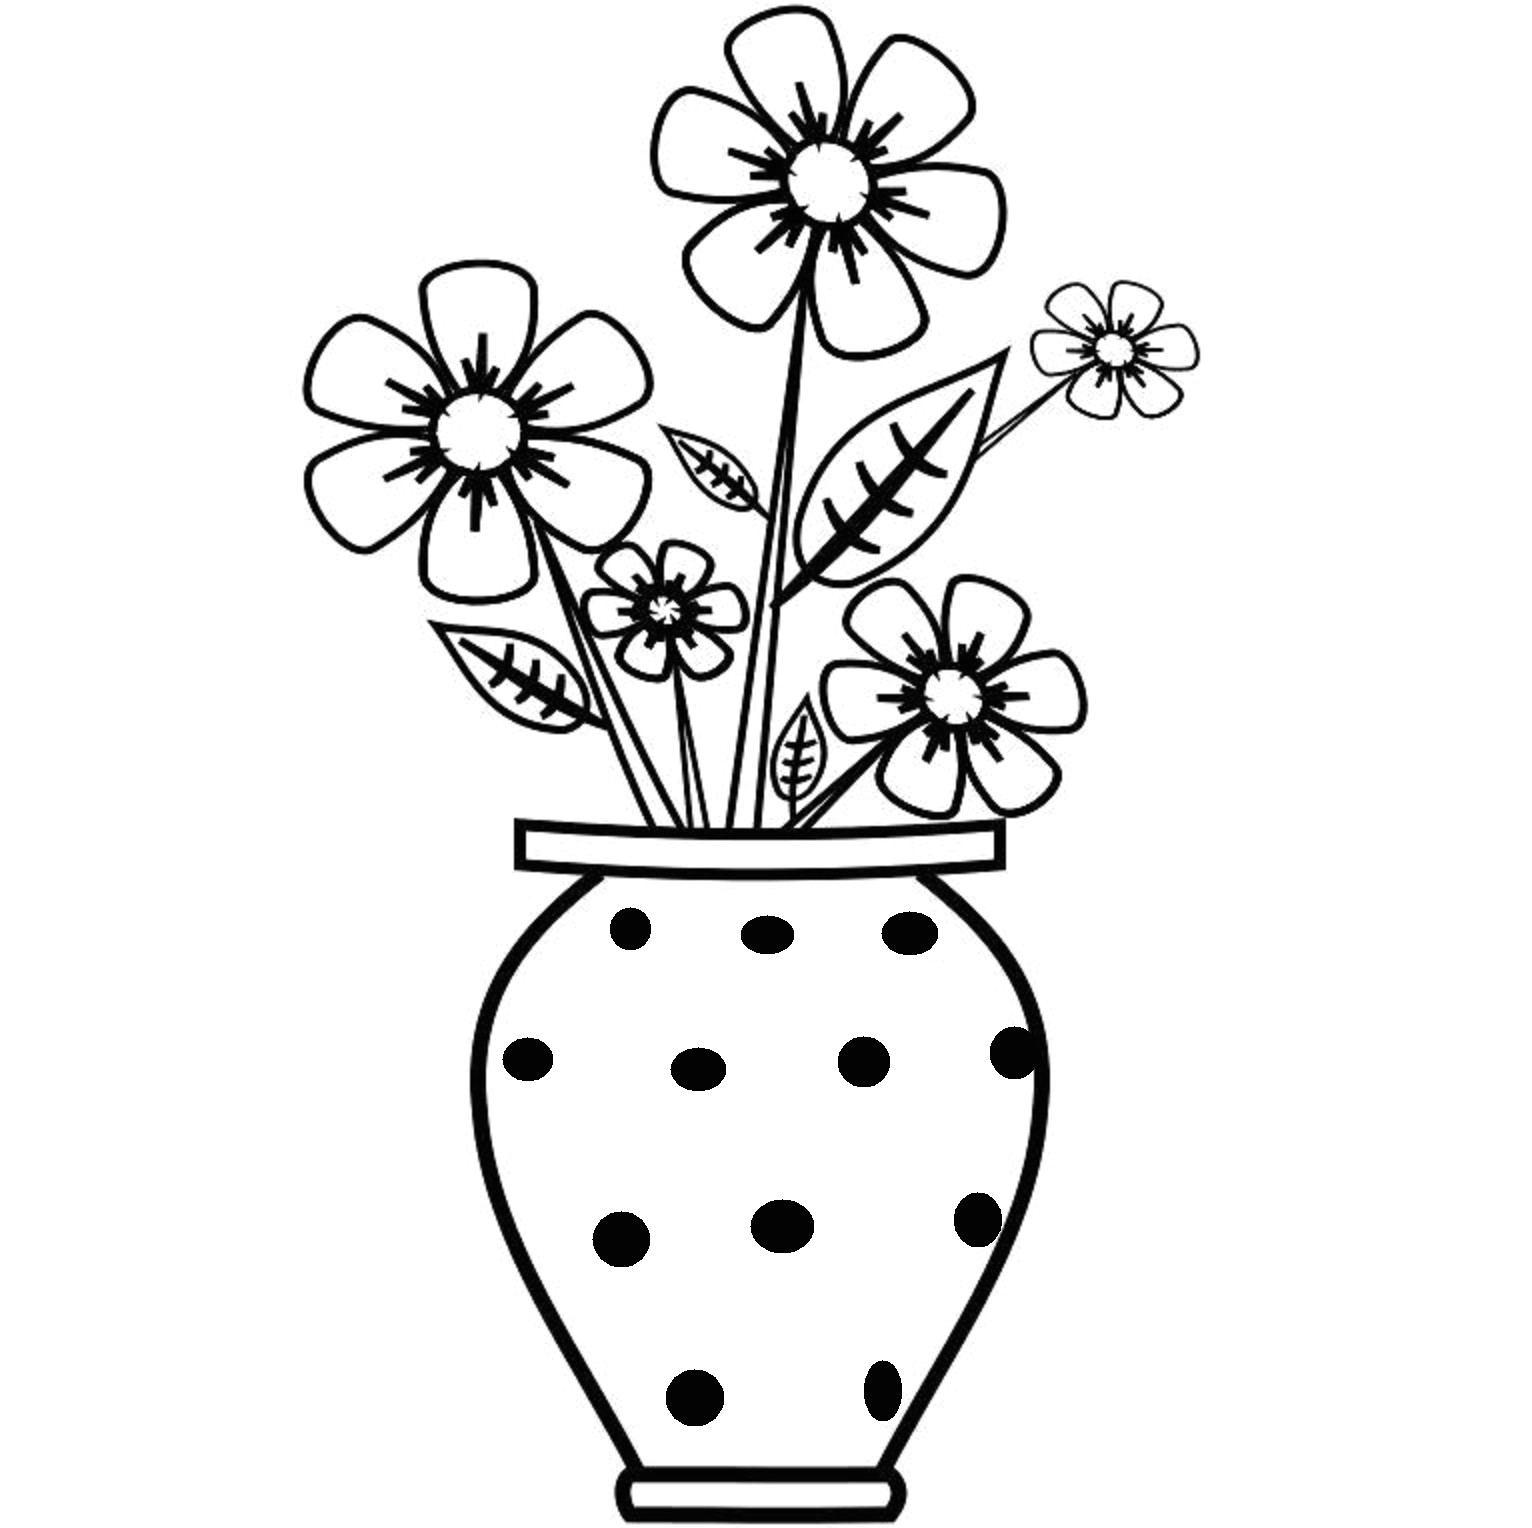 Drawing Of Flower Pot Design How to Draw A Easy Flower for Beginners Flower Pot for Drawing